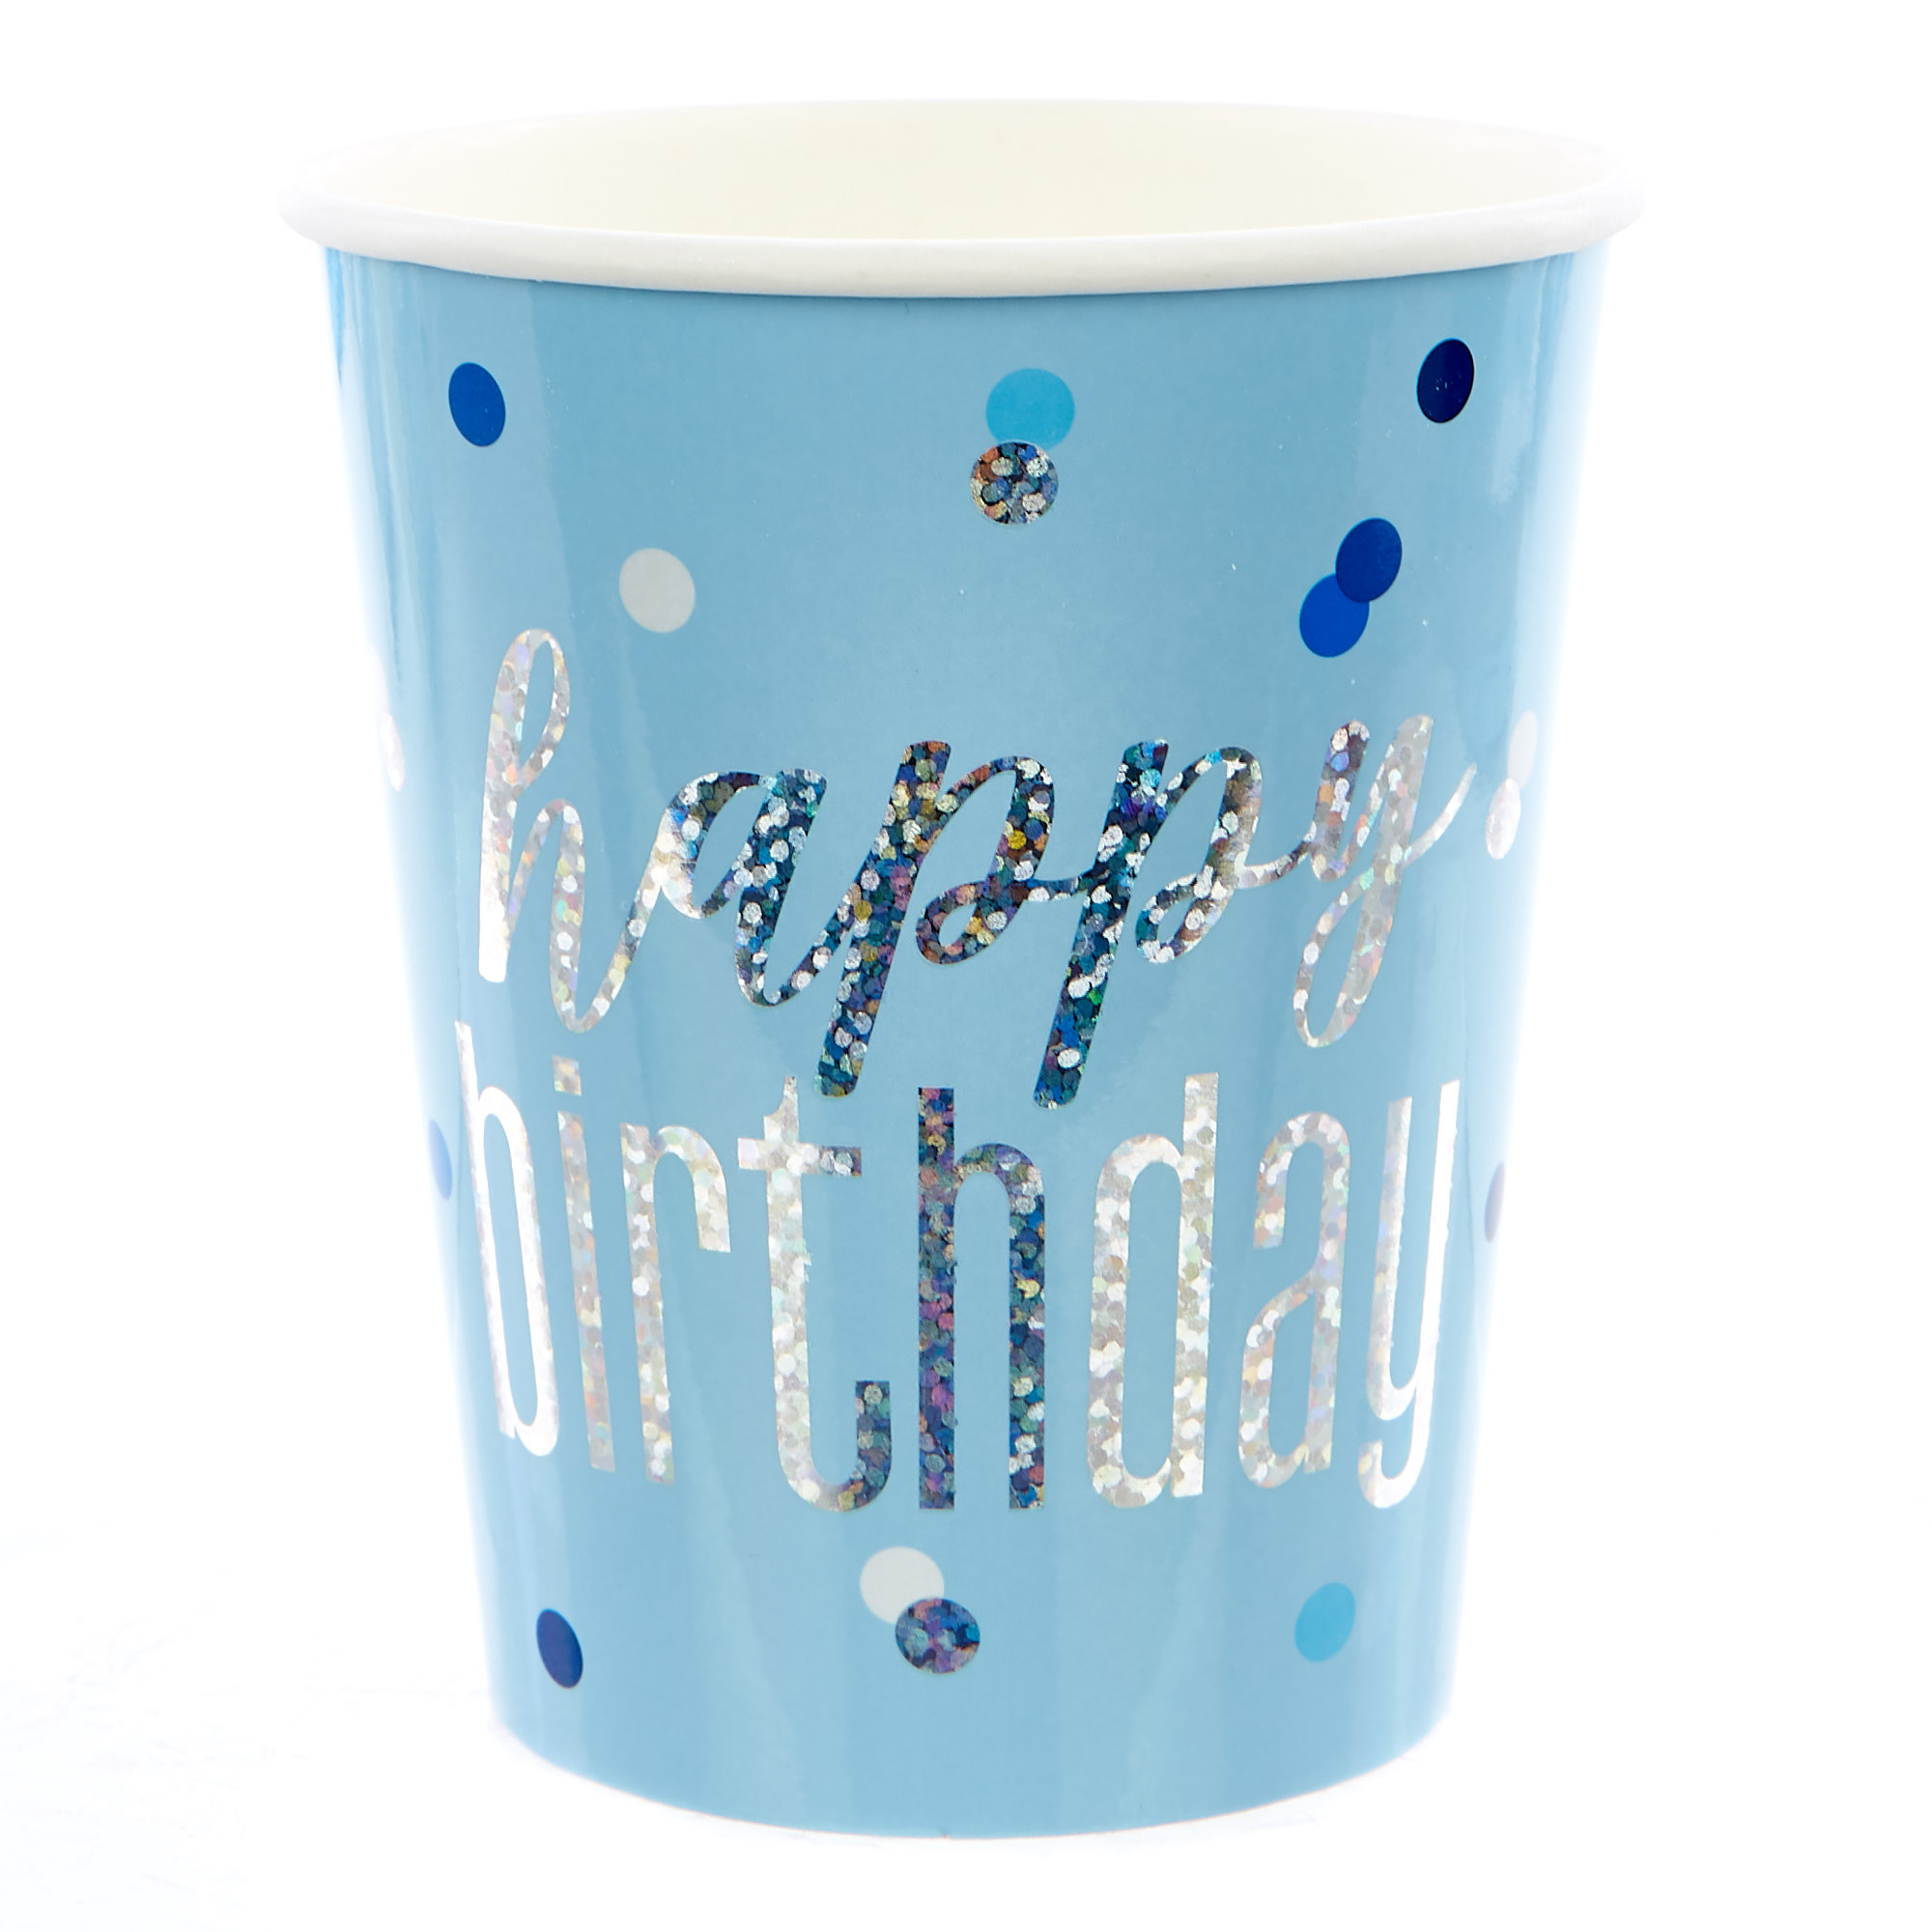 Blue Happy Birthday Party Tableware & Decorations Bundle - 16 Guests